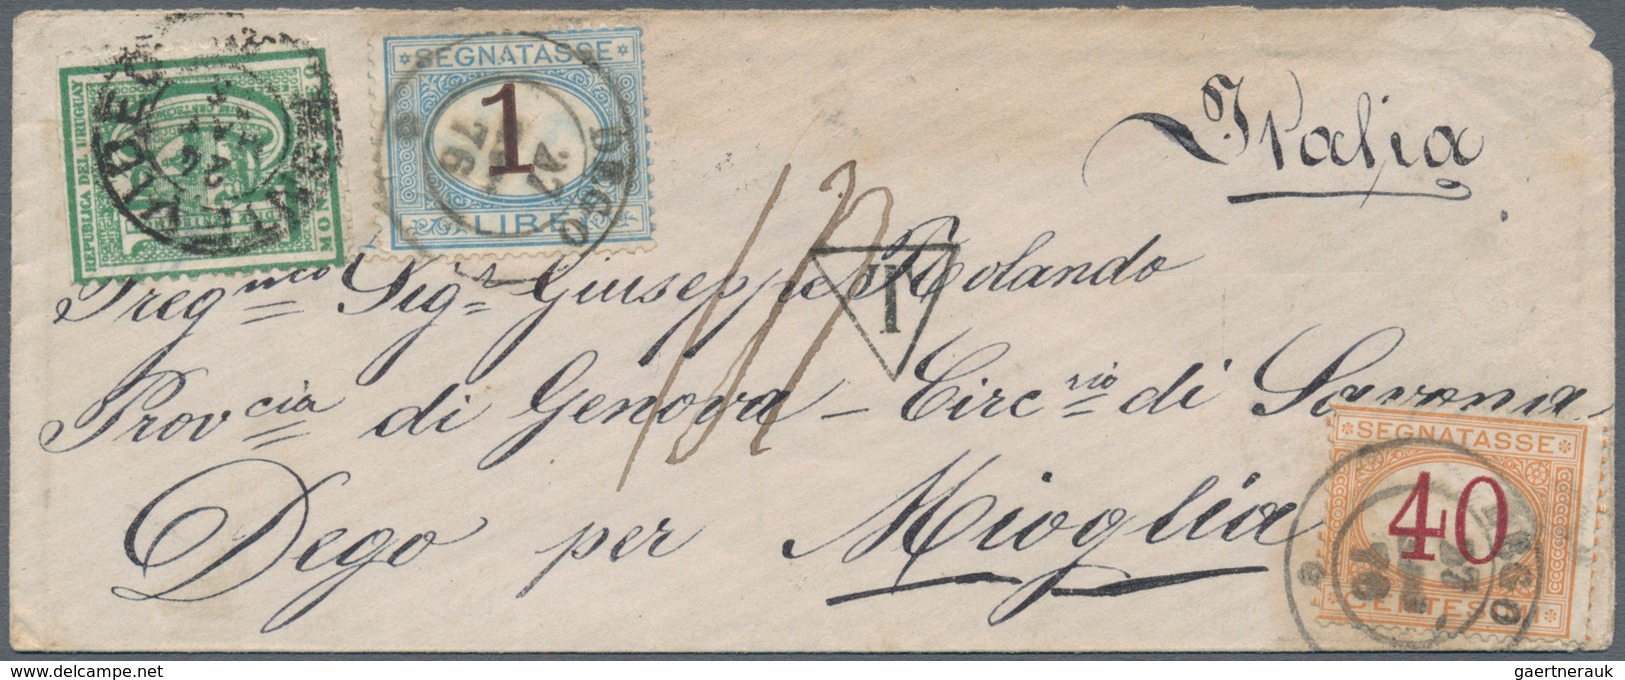 Uruguay: 1875/1876 Two Covers From Montevideo To Italy With Italian Postage Due Stamps, Both Origina - Uruguay